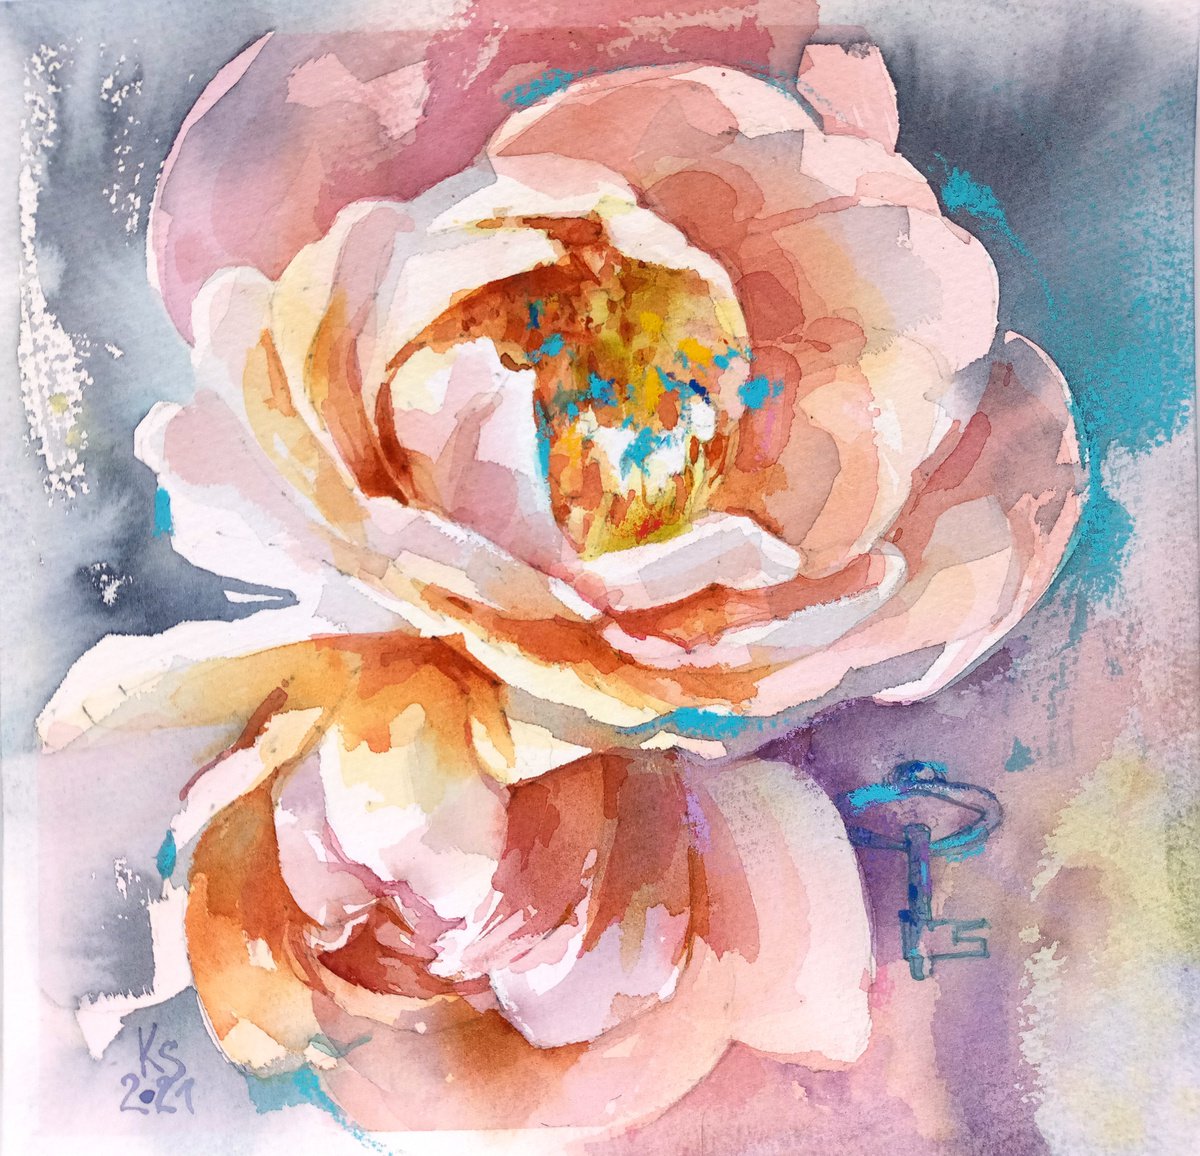 Original watercolor Touch of spring by Ksenia Selianko